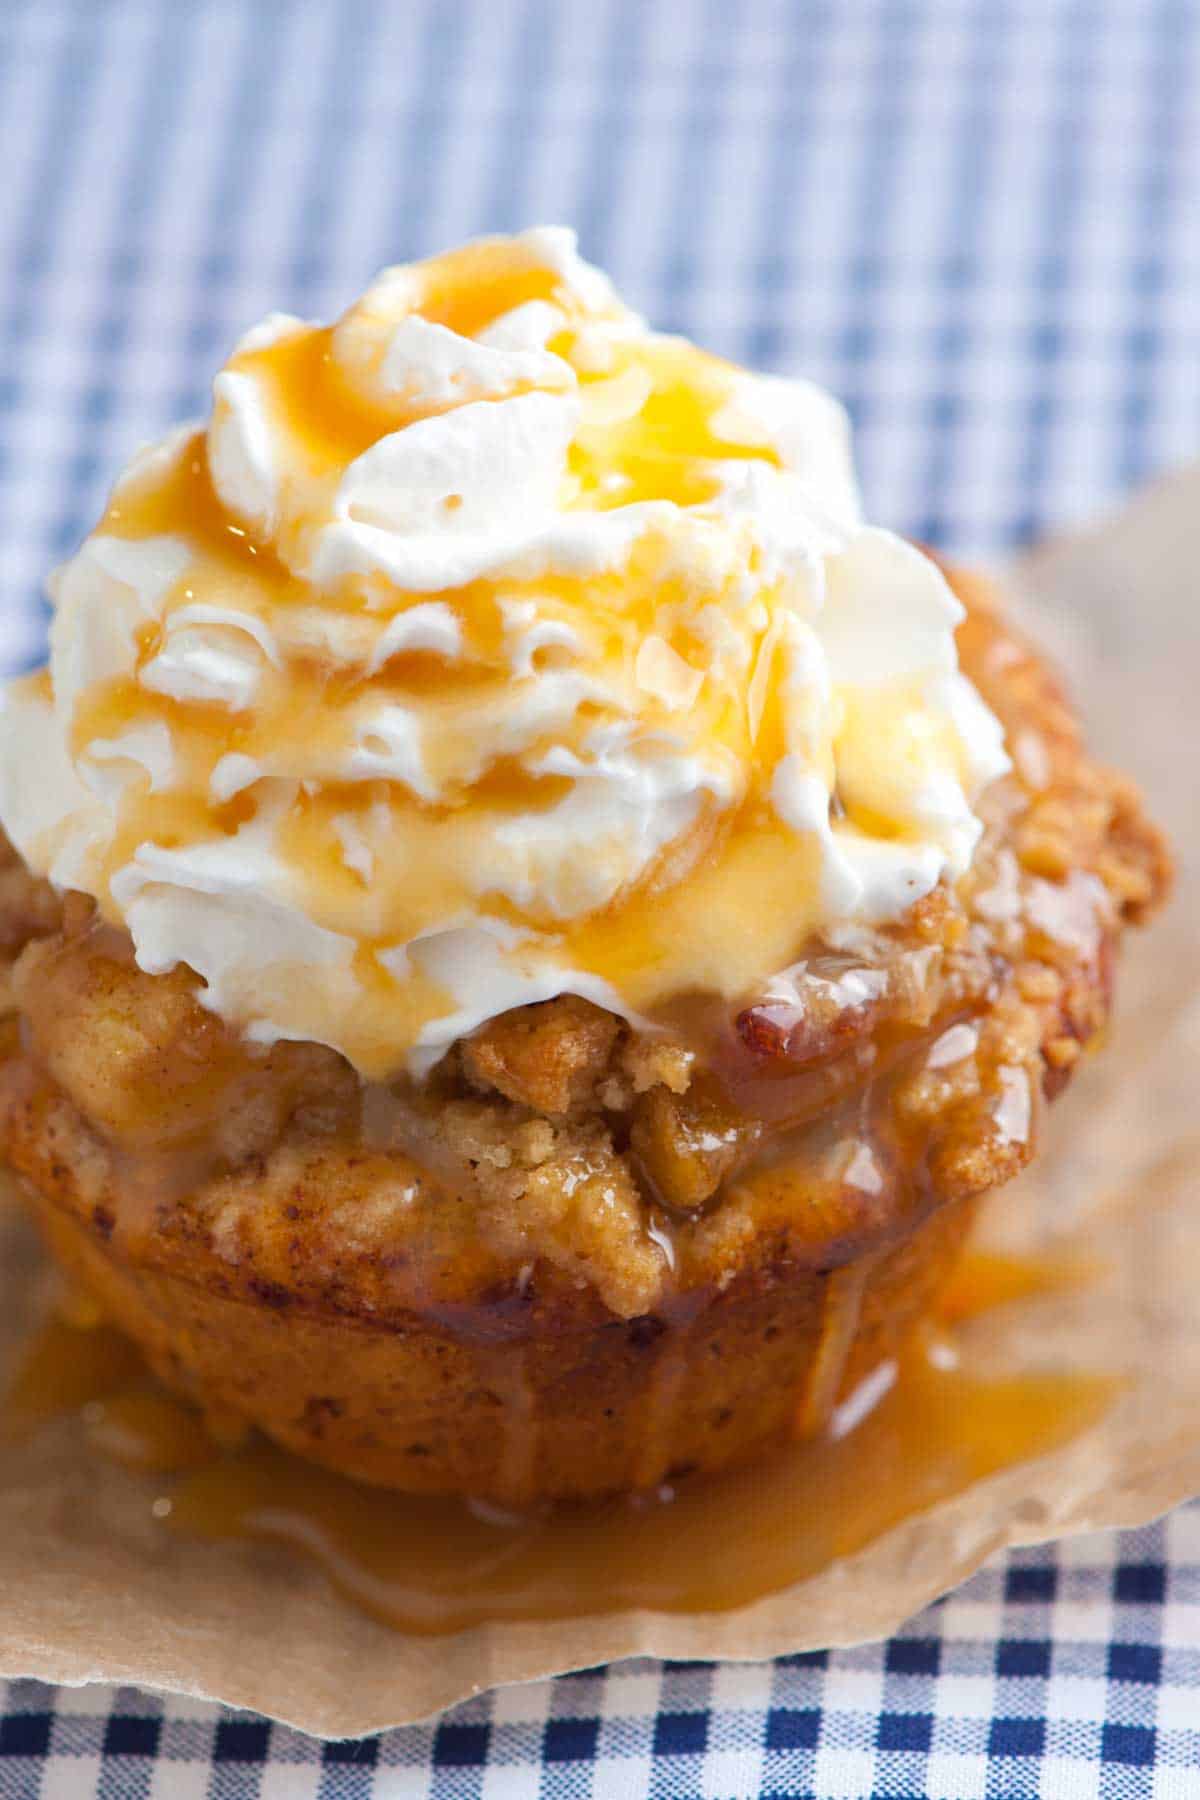 How to Make Apple Pie Cupcakes with a Cinnamon Roll Crust